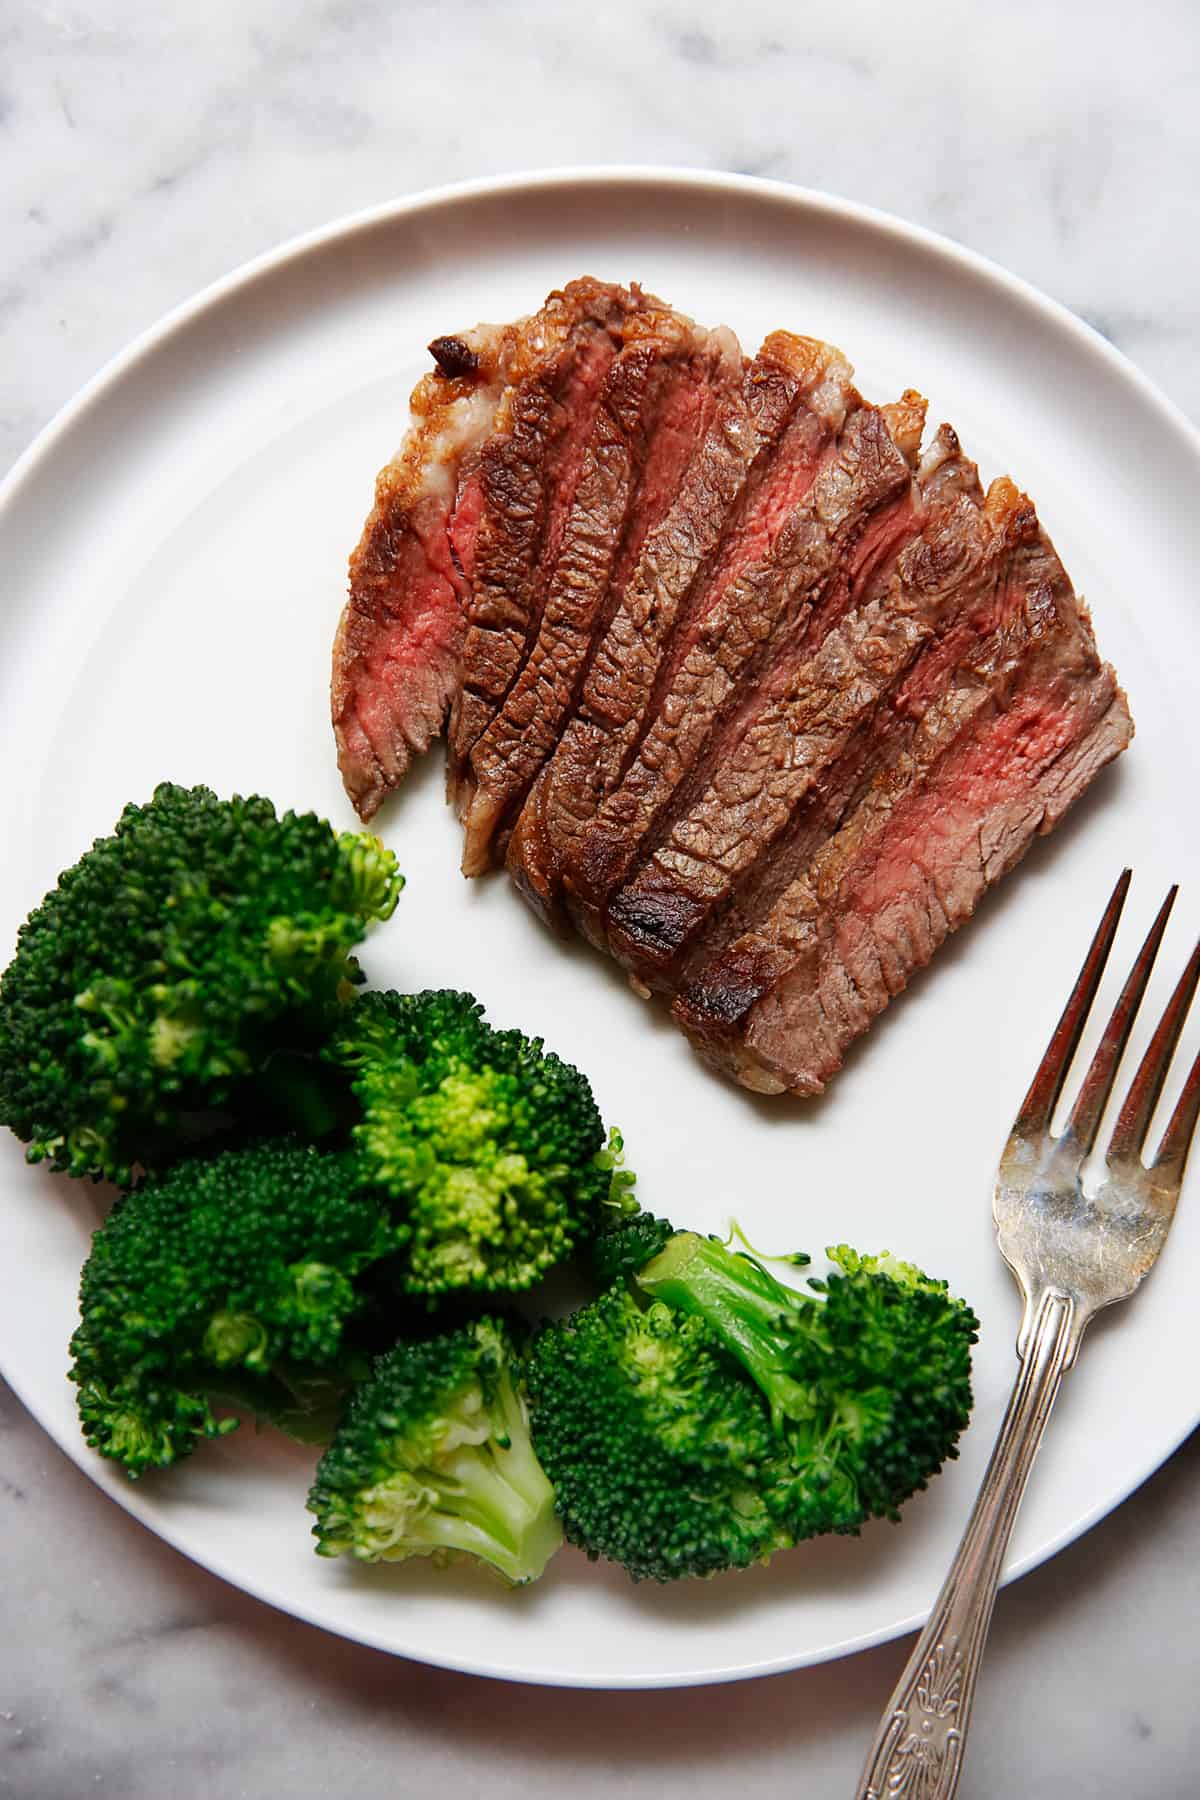 Pan seared steak with butter